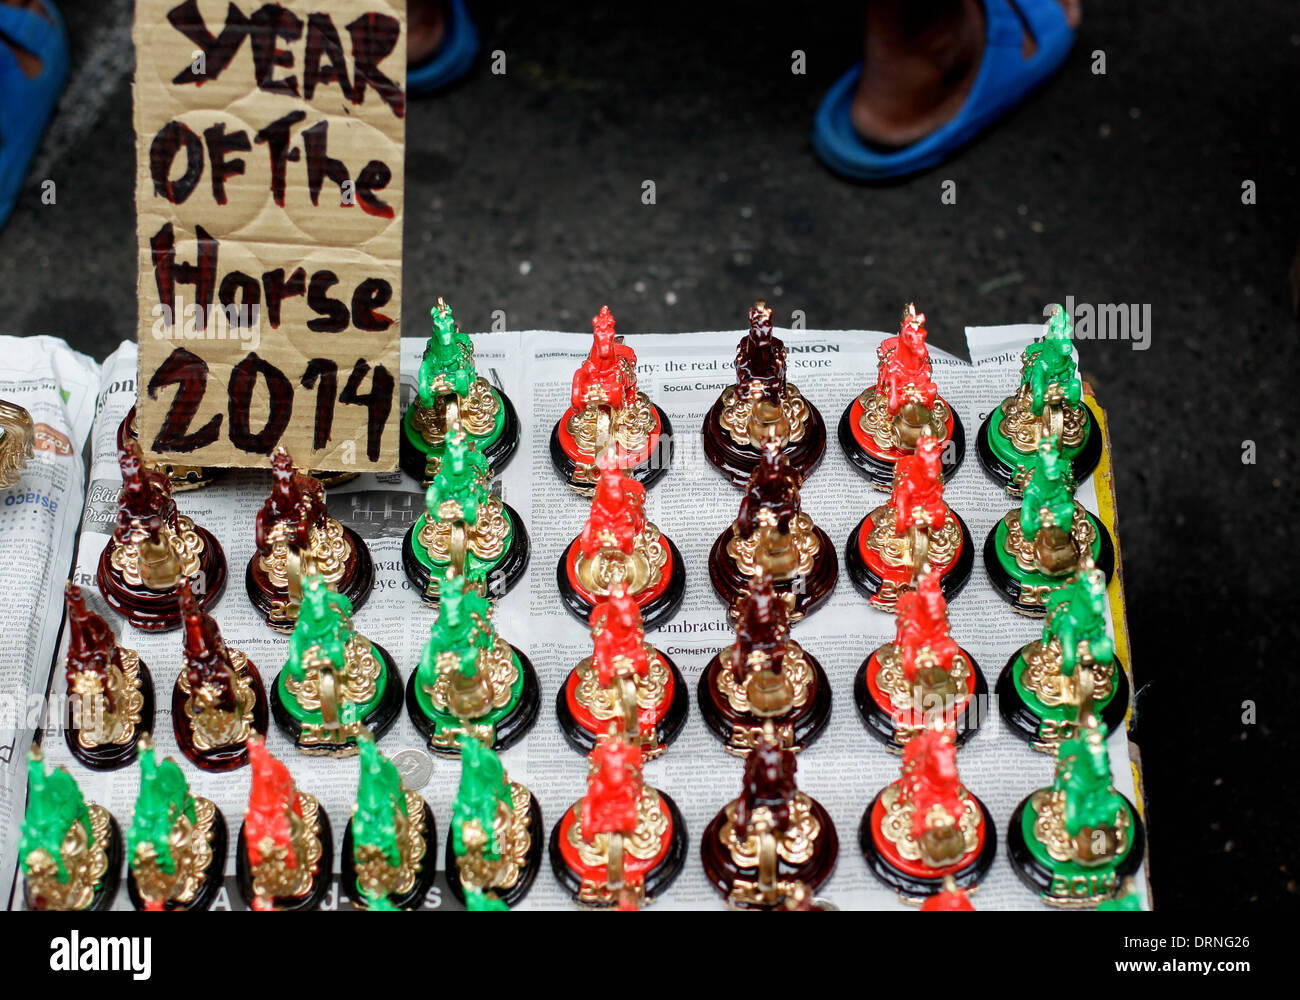 Manila, Phillipines. 30th January 2014. Lucky charms in the form of horses are sold in the streets Chinatown Manila a day before the celebration of the Chinese New Year, the Year of the Horse on January 30, 2014. Photo by Mark Cristino/Alamy Live News  Stock Photo